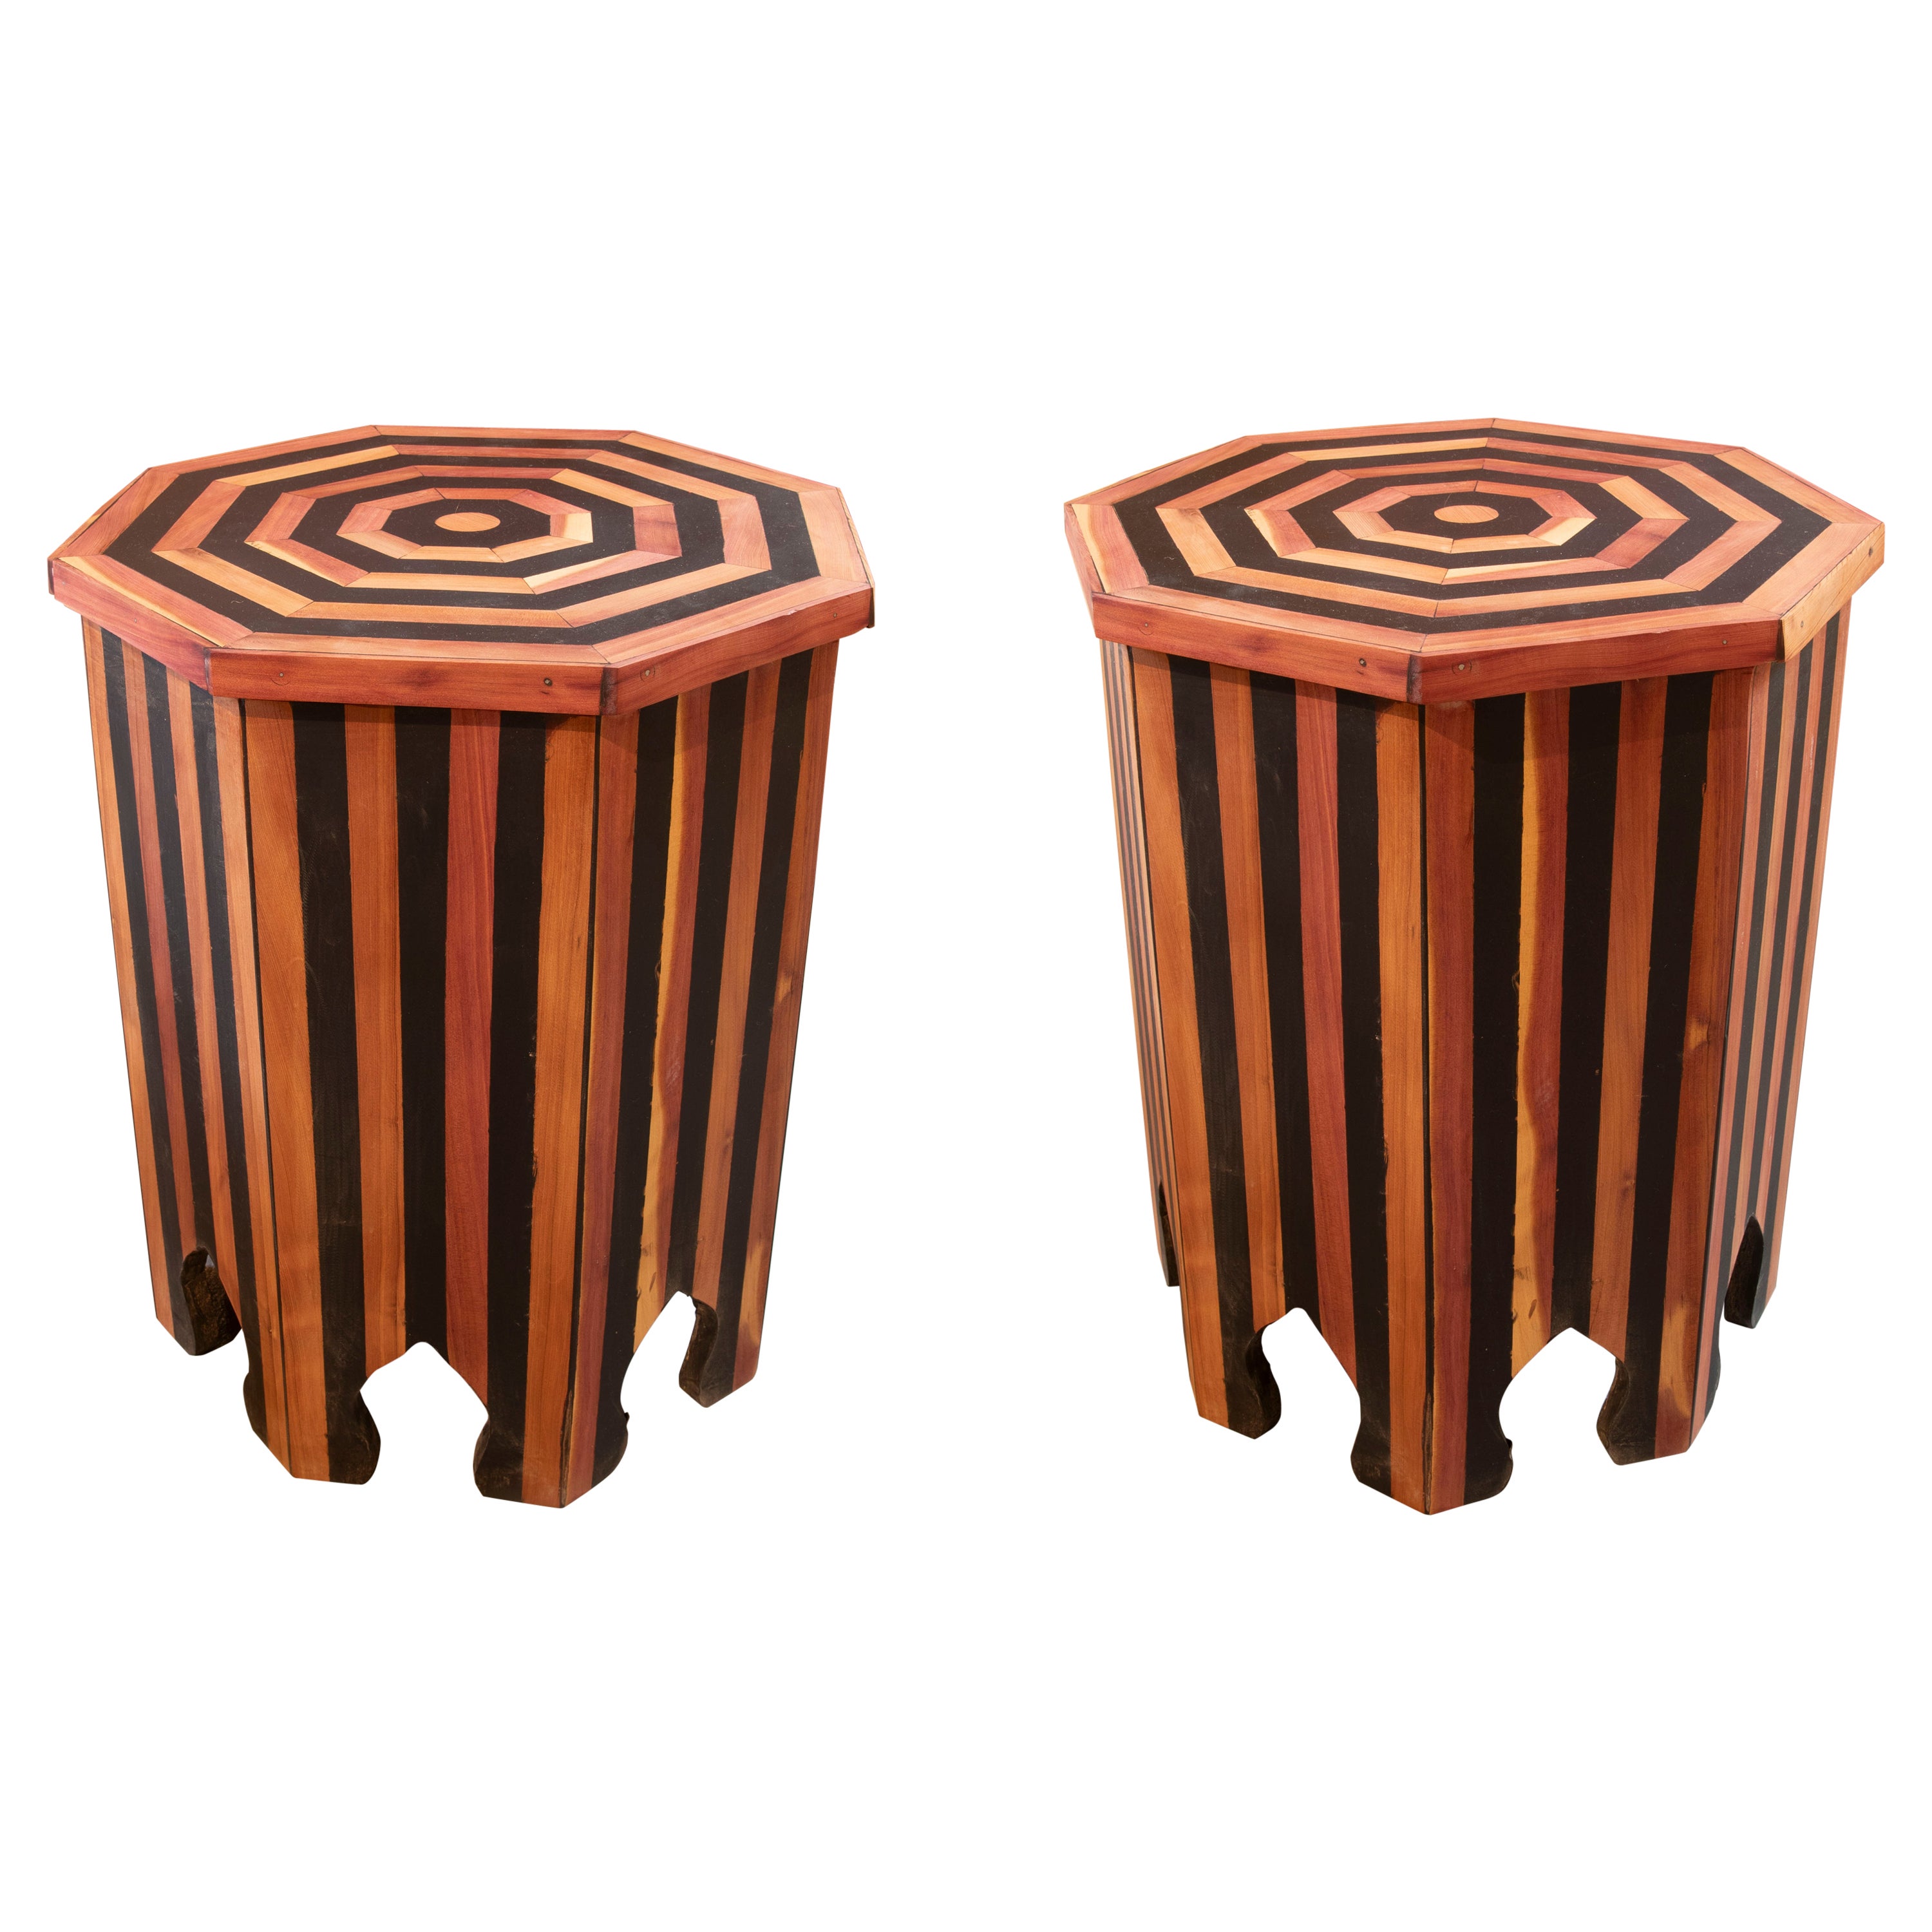 Pair of Octagonal Wooden Side Tables with Striped Decorations For Sale